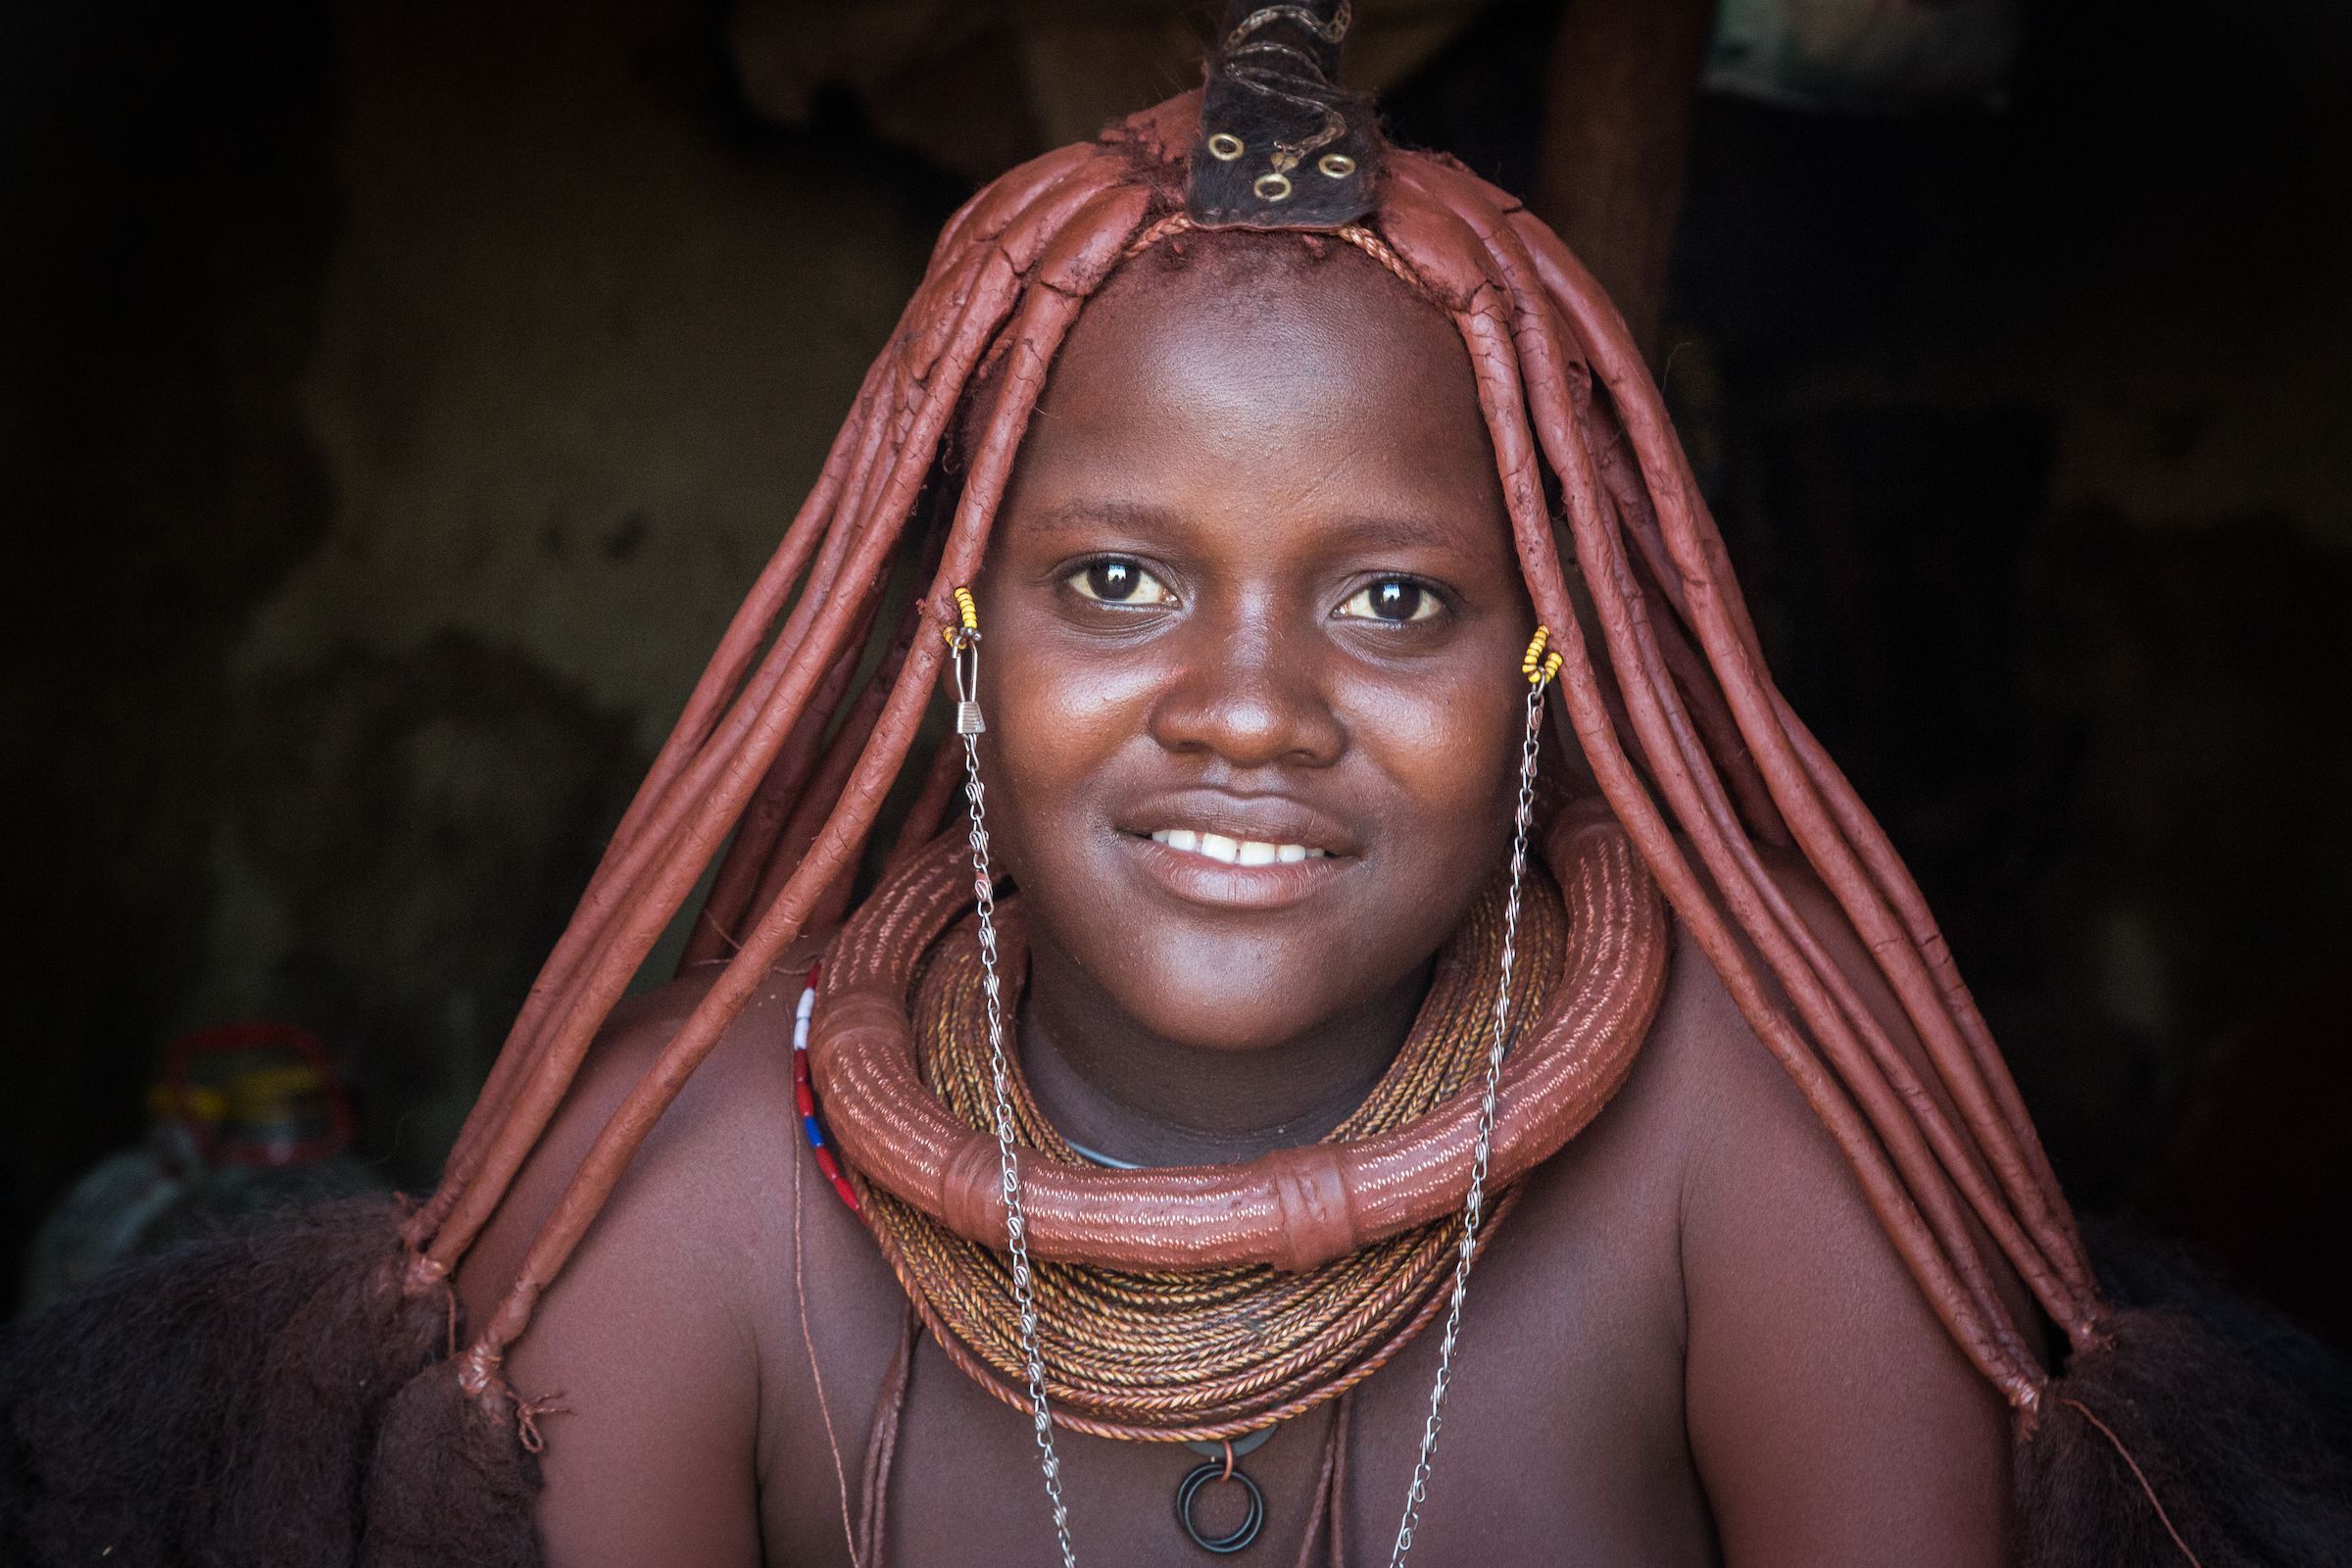 Portrait of a Himba girl on our photography tour of Namibia